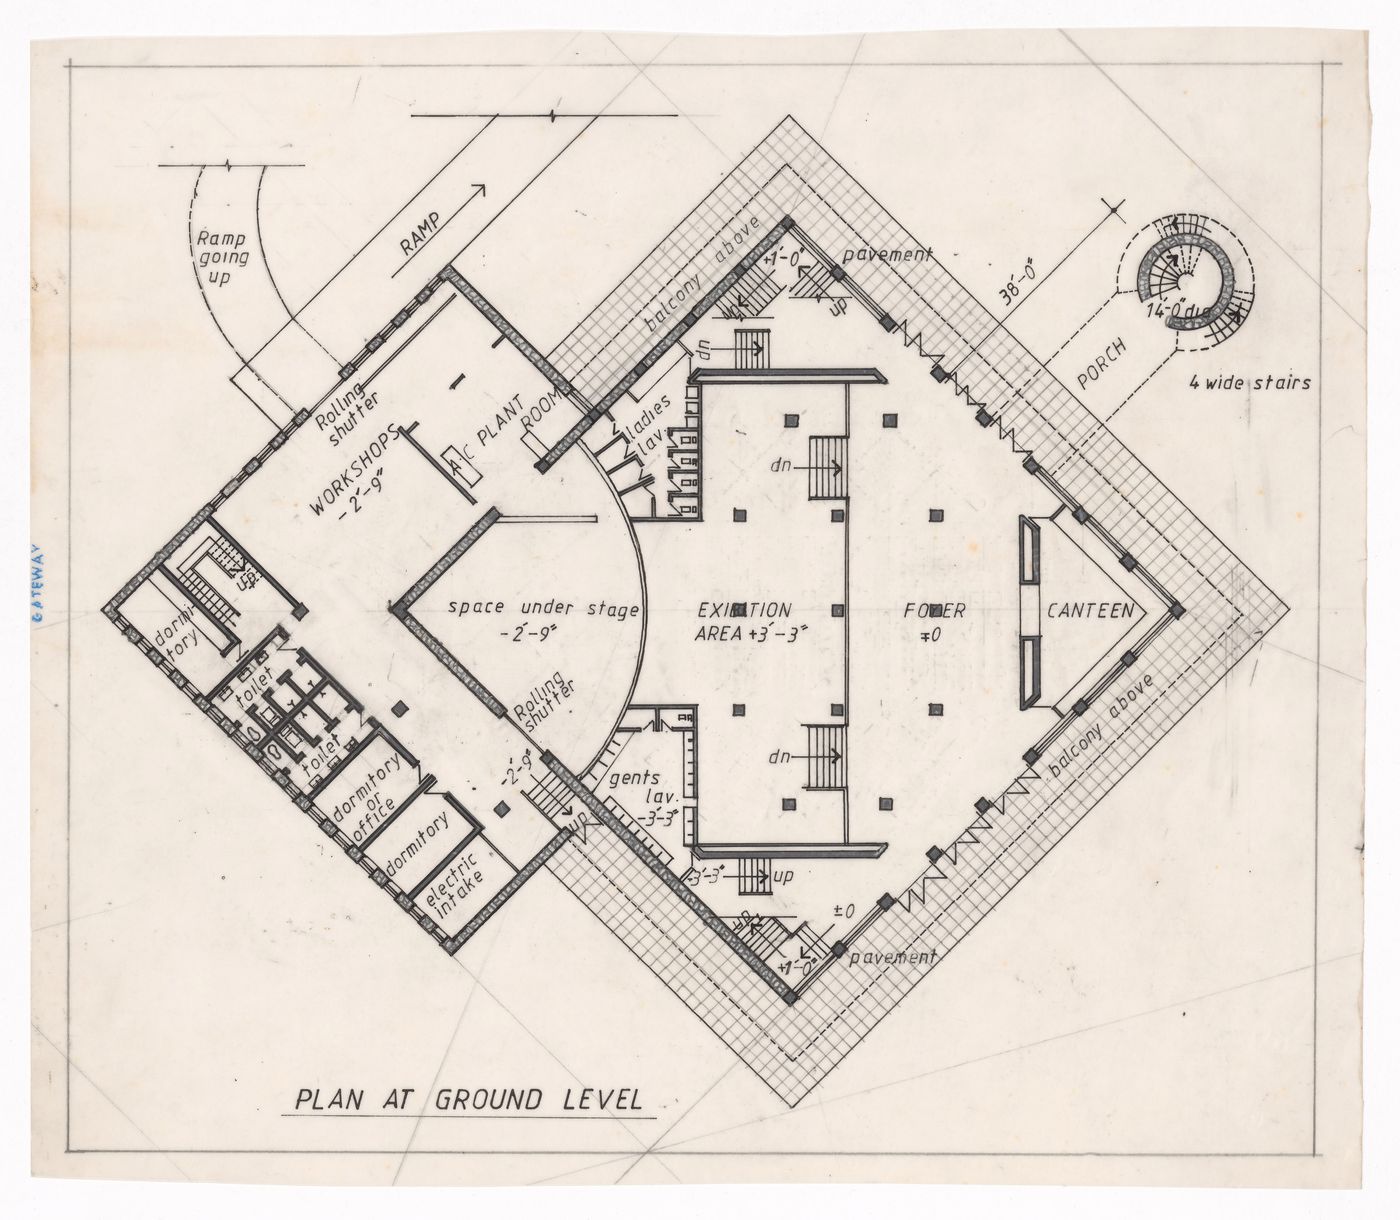 Floor plan at ground floor for Theatre for J&K Academy of Art, Culture and Languages, Jammu, India